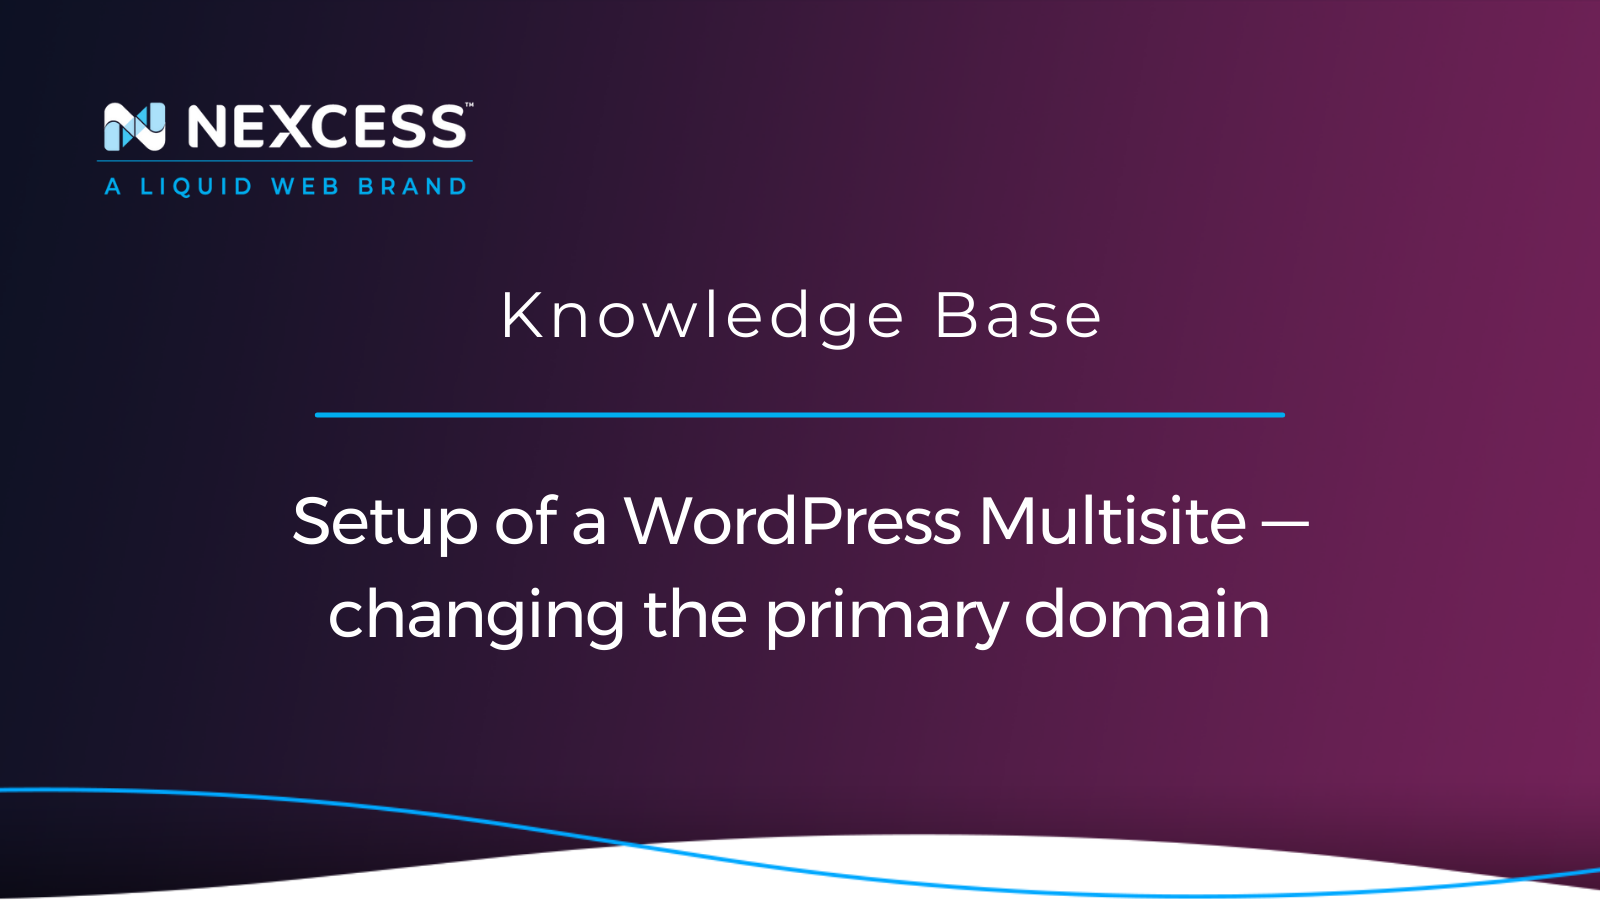 Setup of a WordPress multisite — changing the primary domain